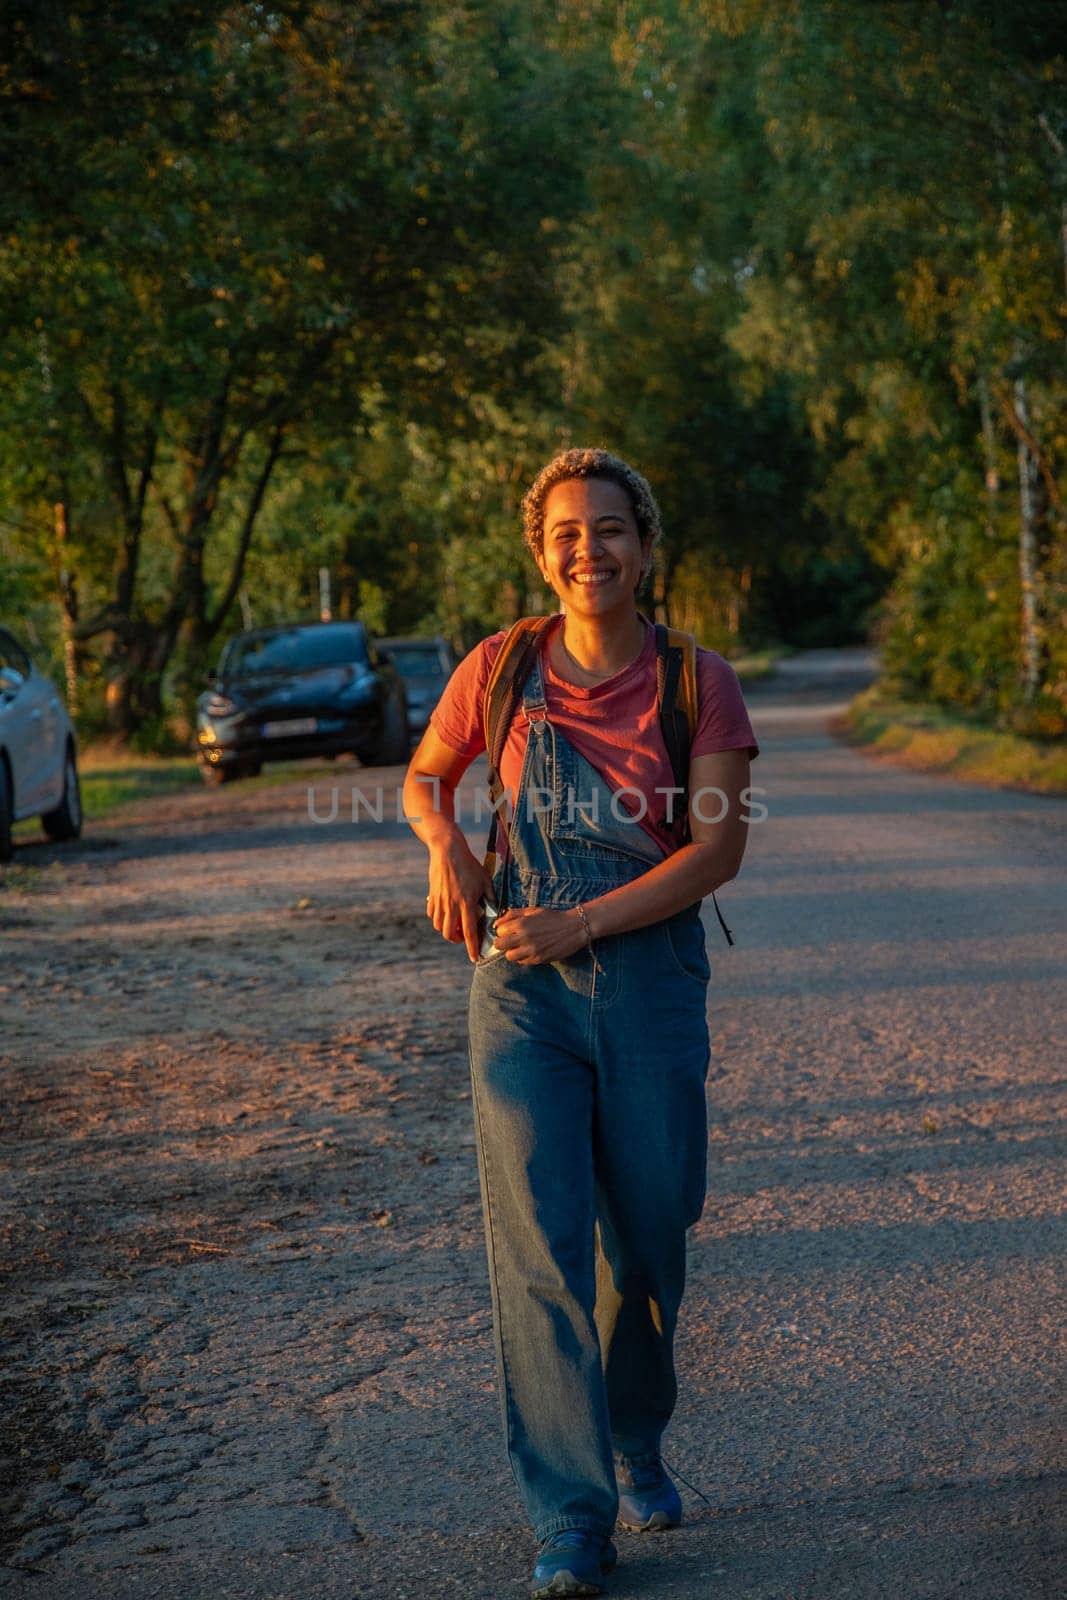 A young Brazilian woman in denim overalls walks along a forest road, the girl smiles happily,there is a car in the background, High quality photo